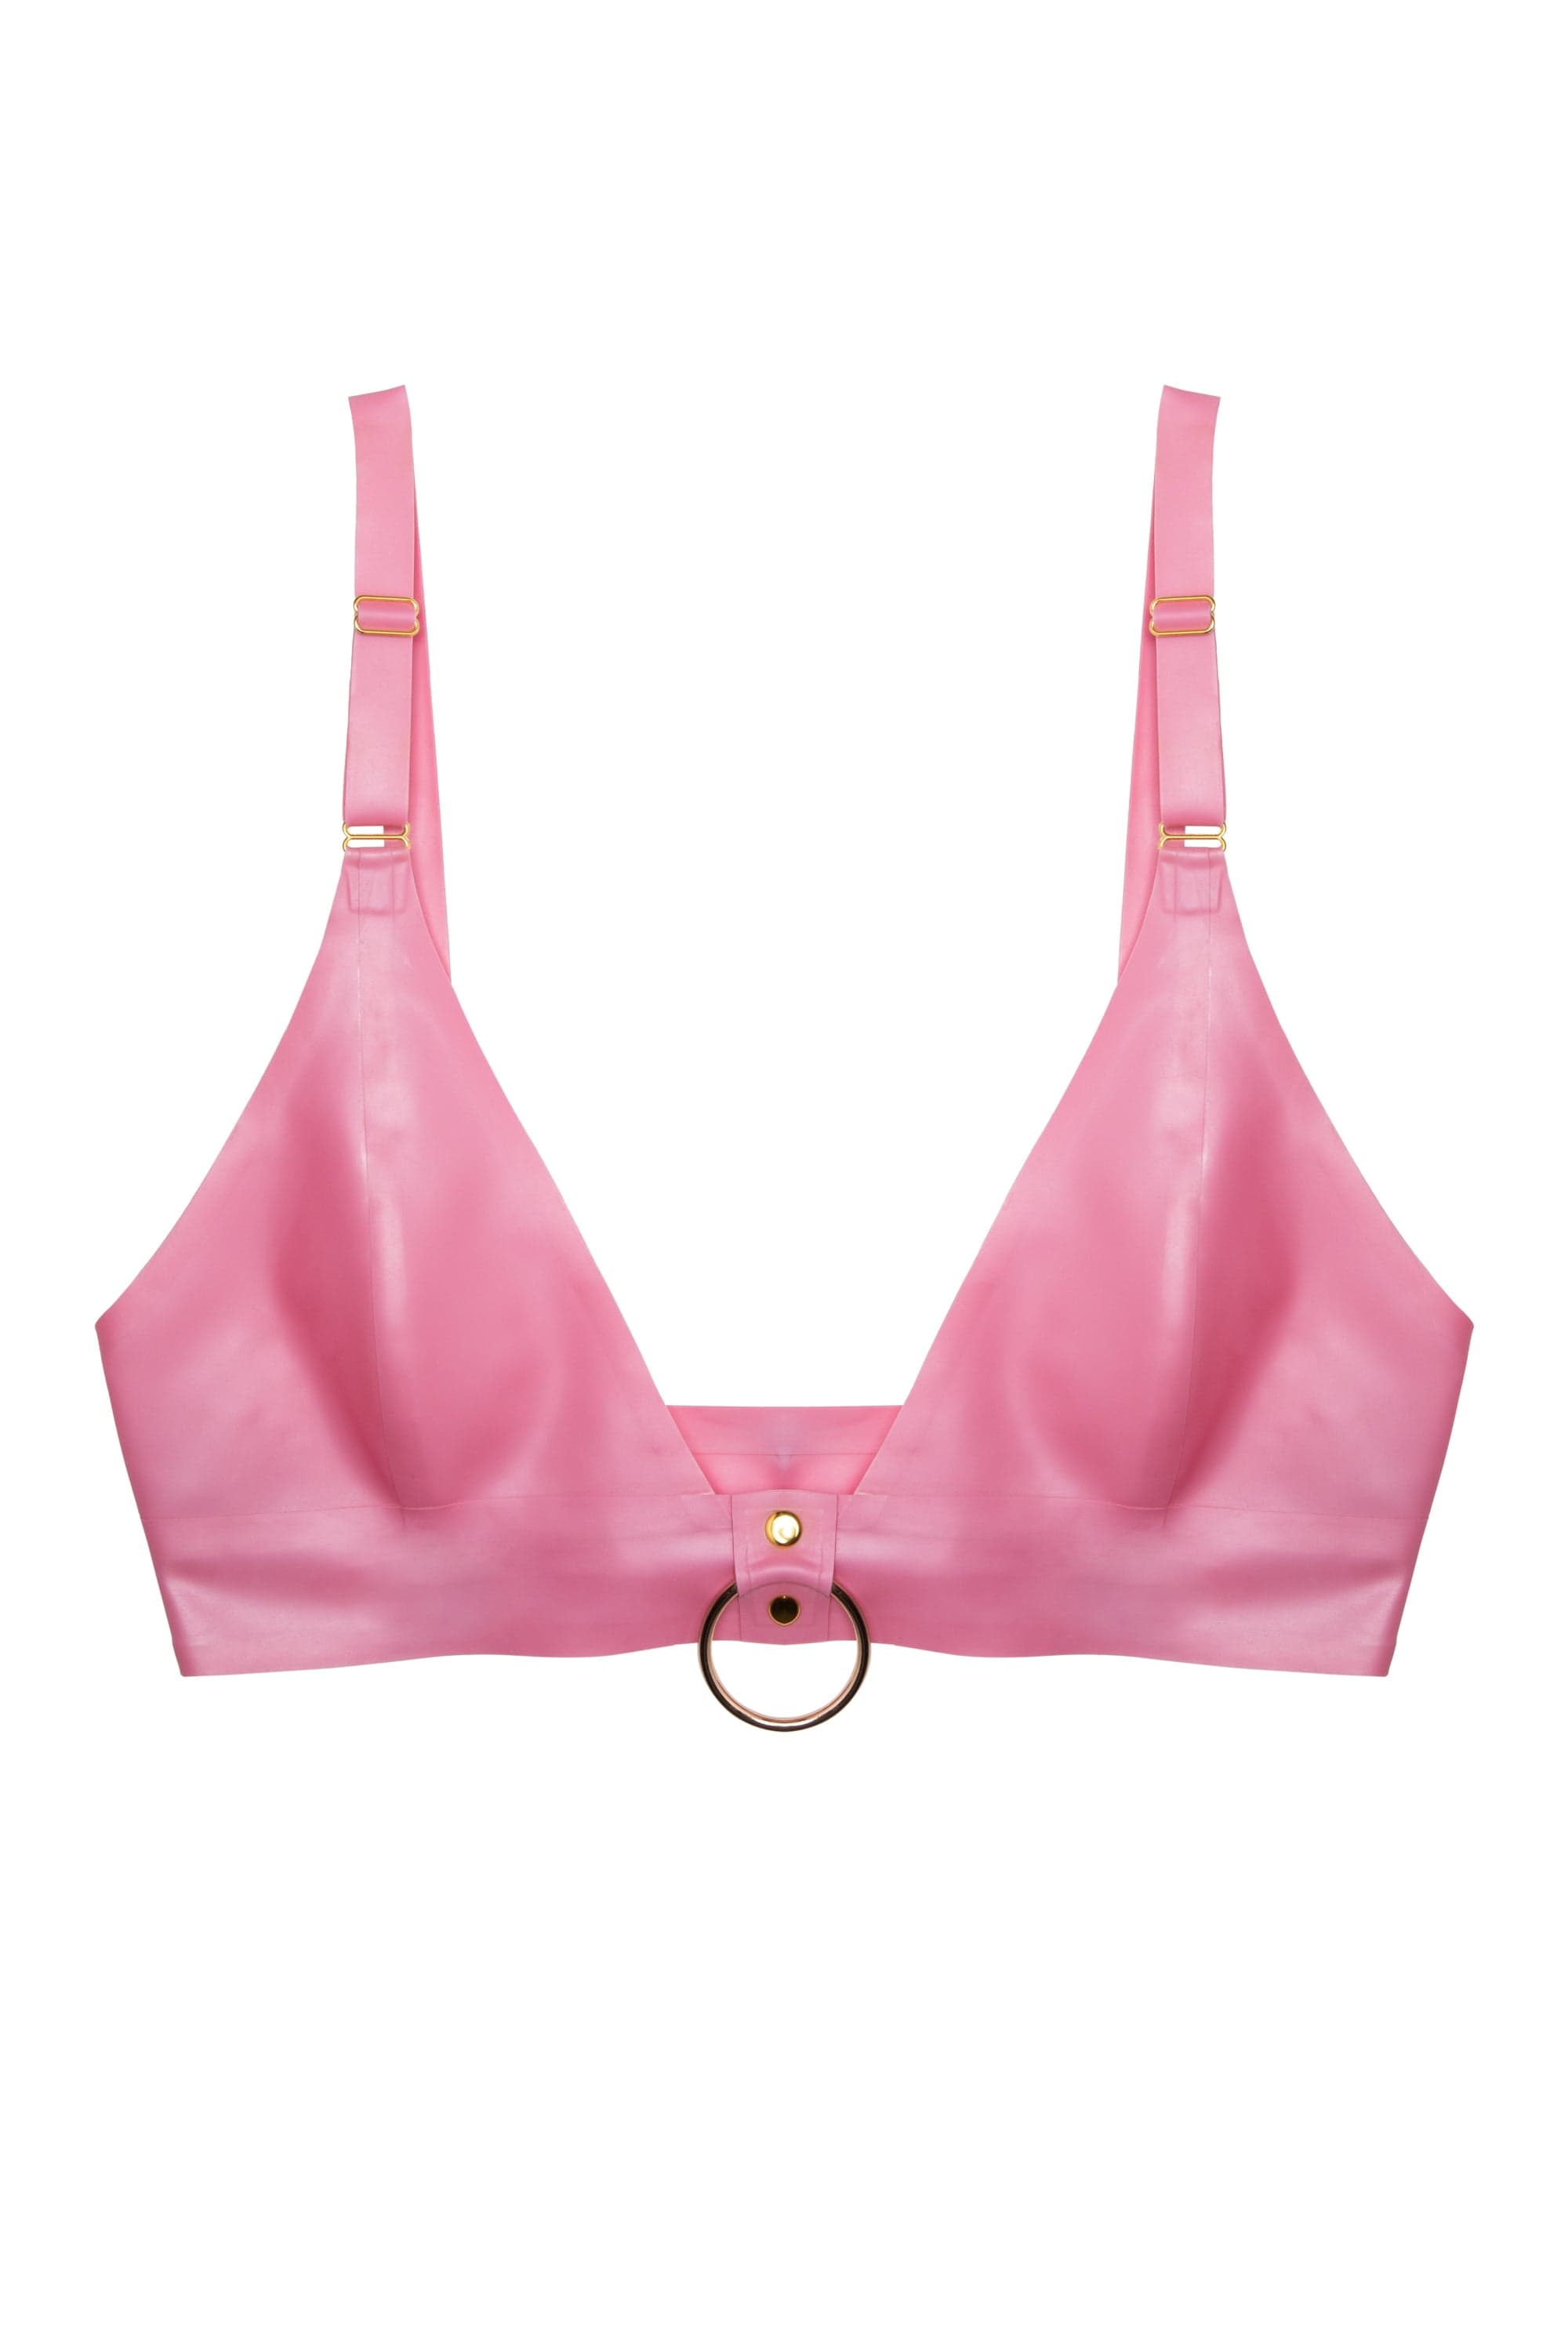 Imogen Pink Latex and Ring Bra